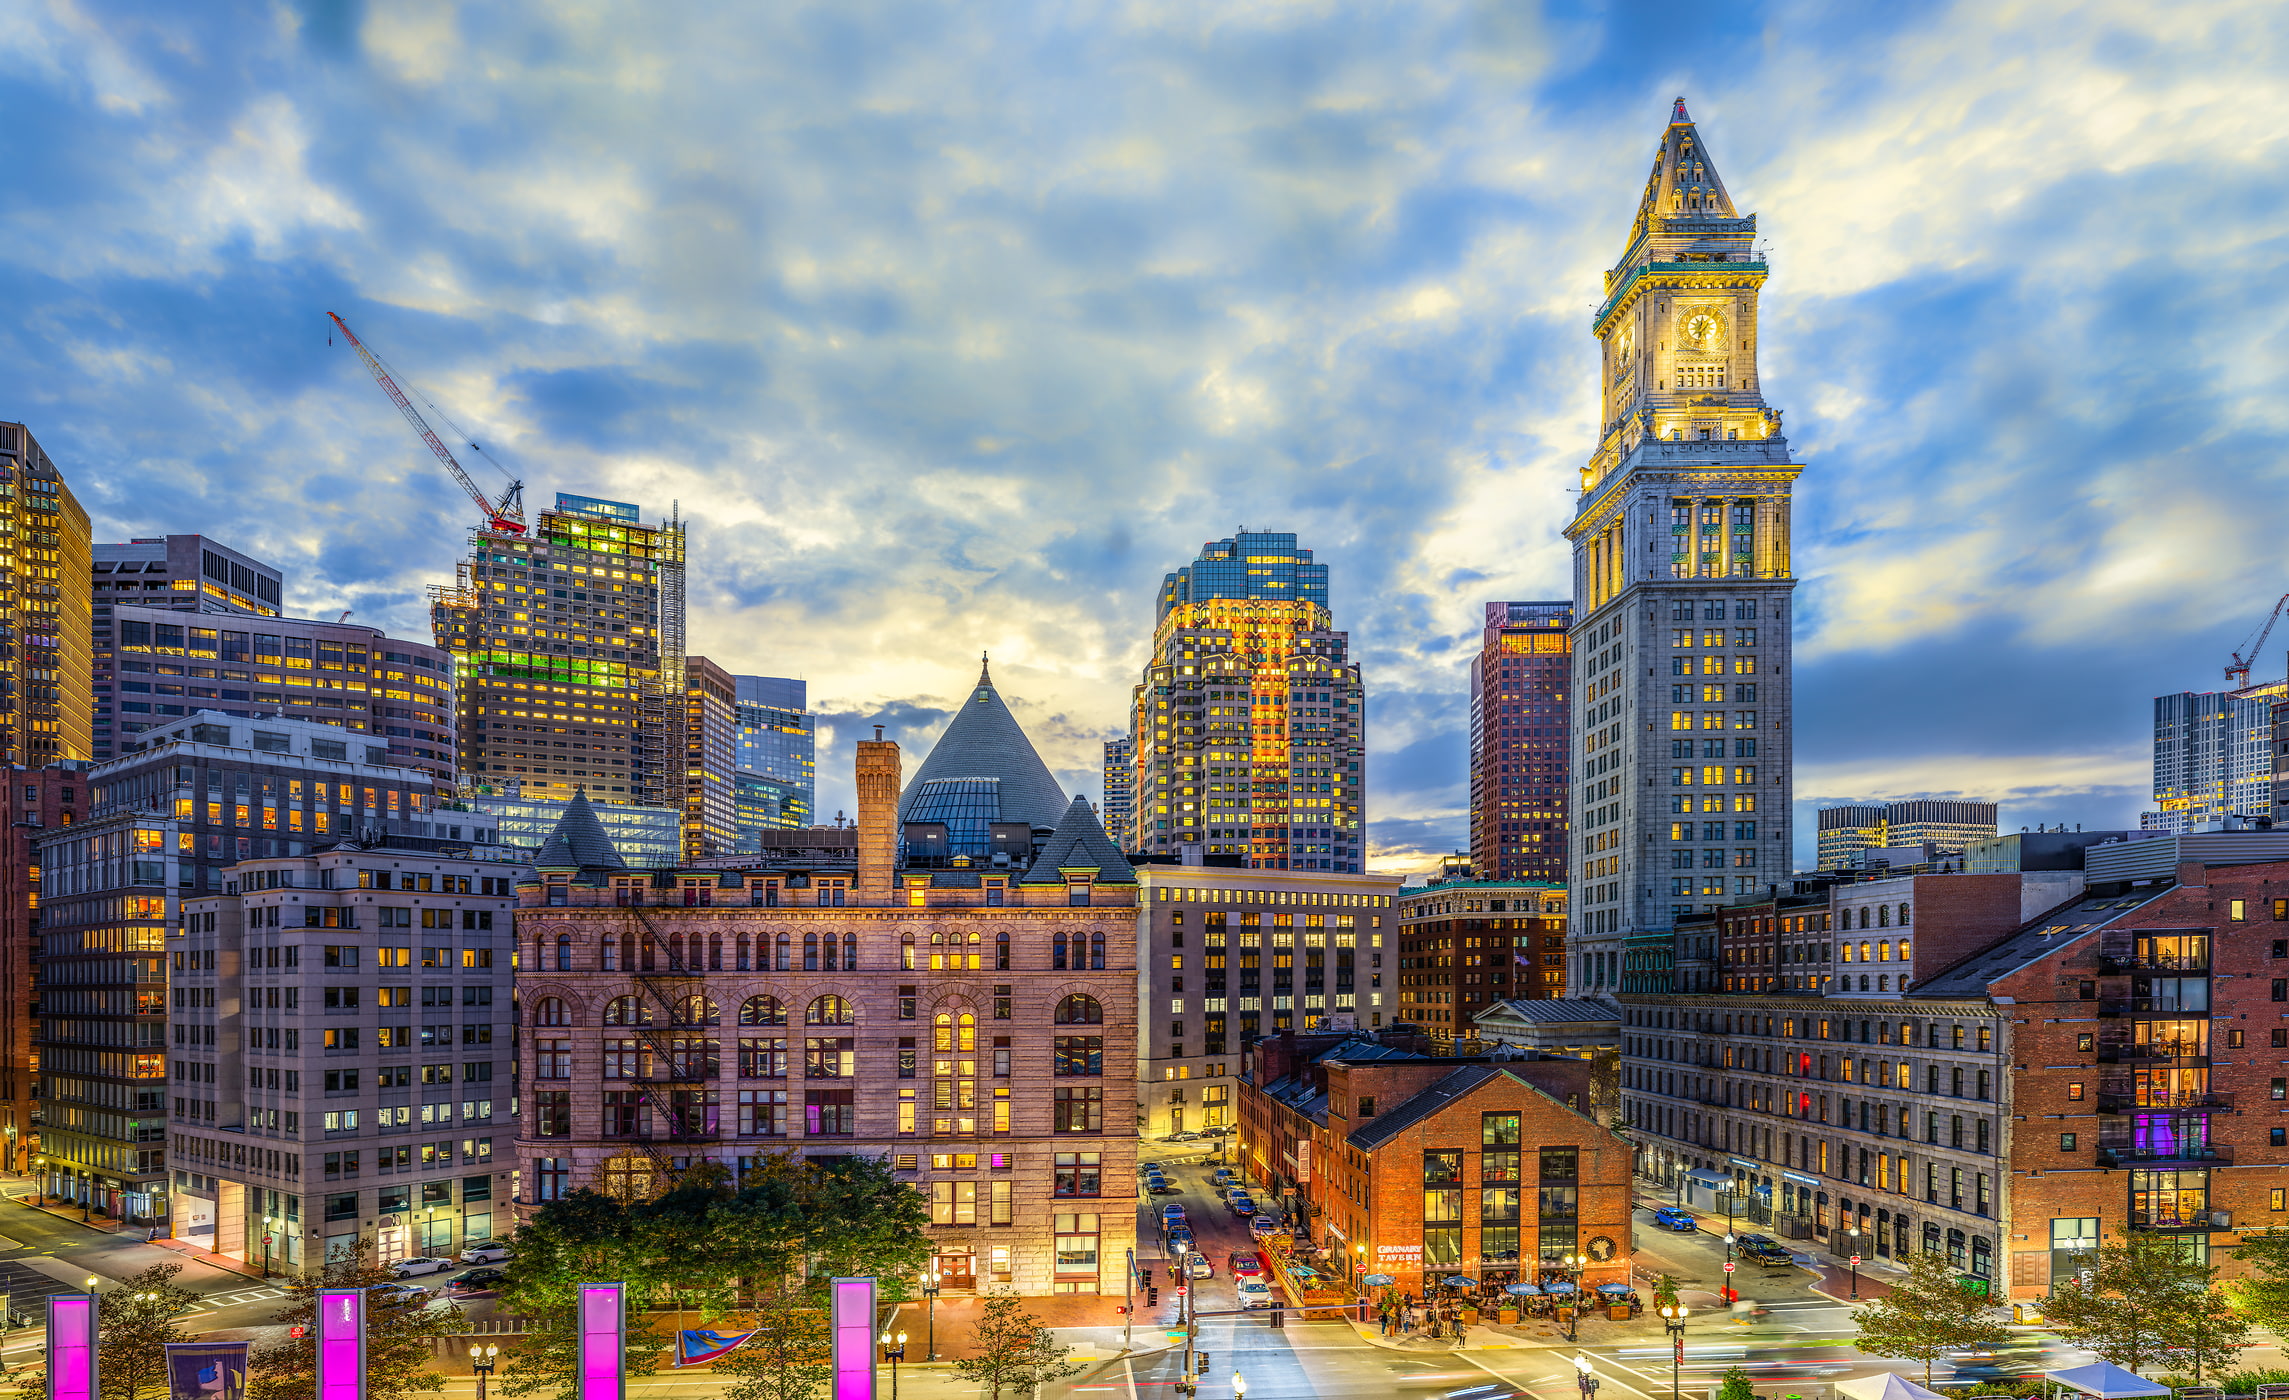 2,916 megapixels! A very high resolution, large-format VAST photo print of the Custom House in Boston; photograph created by Chris Blake in Boston, Massachusetts.